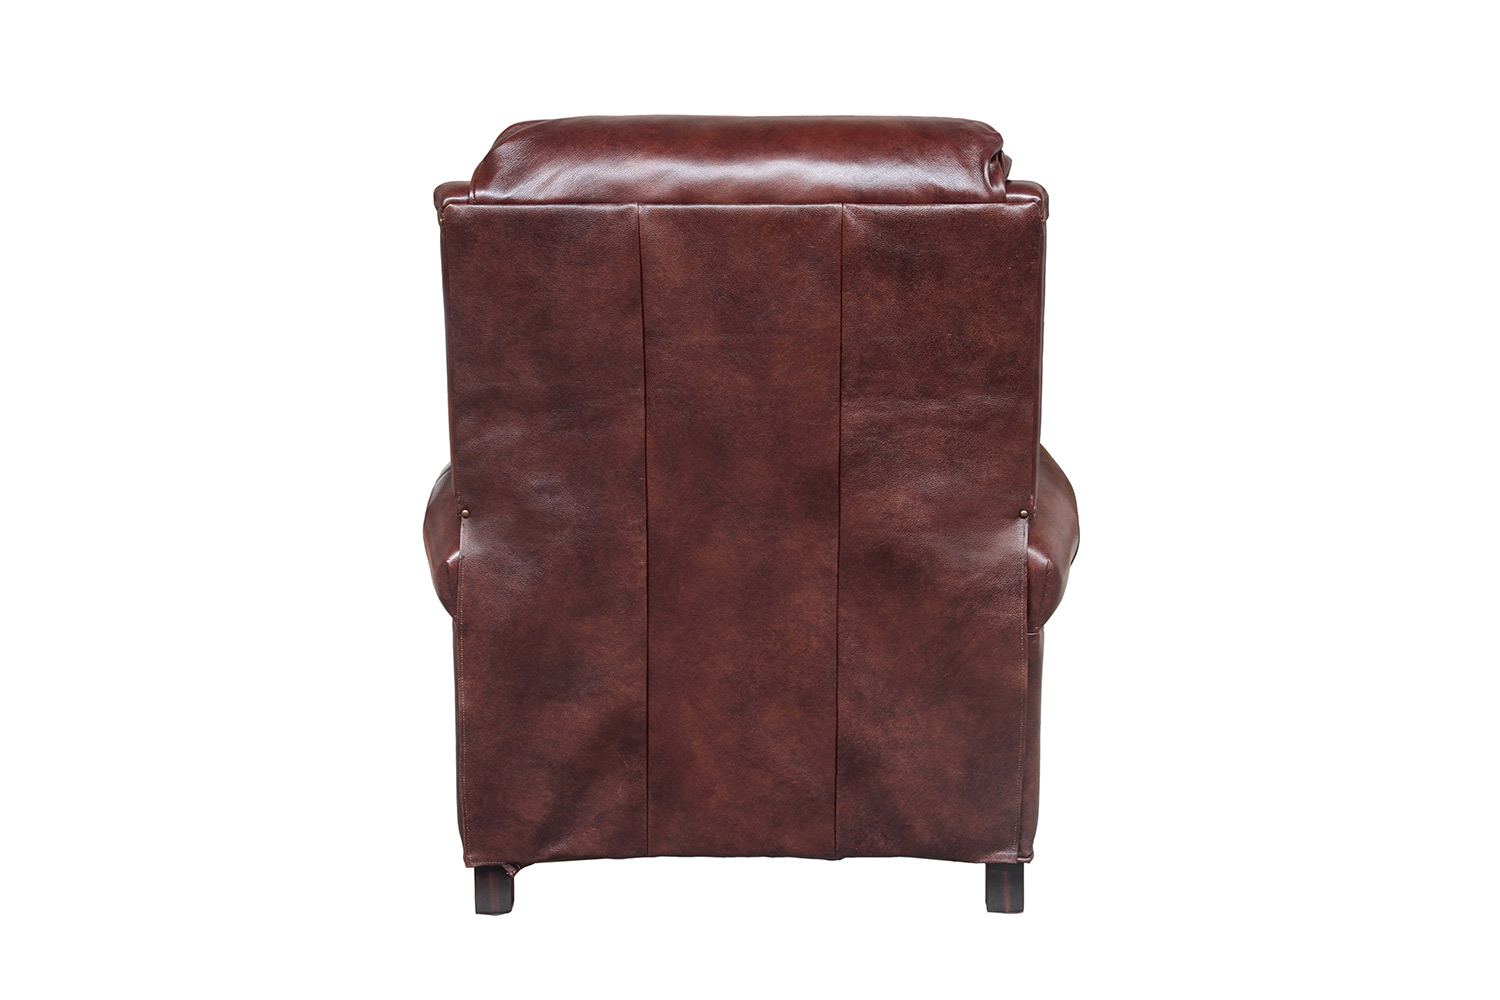 Barcalounger Avery Recliner Chair - Wenlock Fudge/All Leather